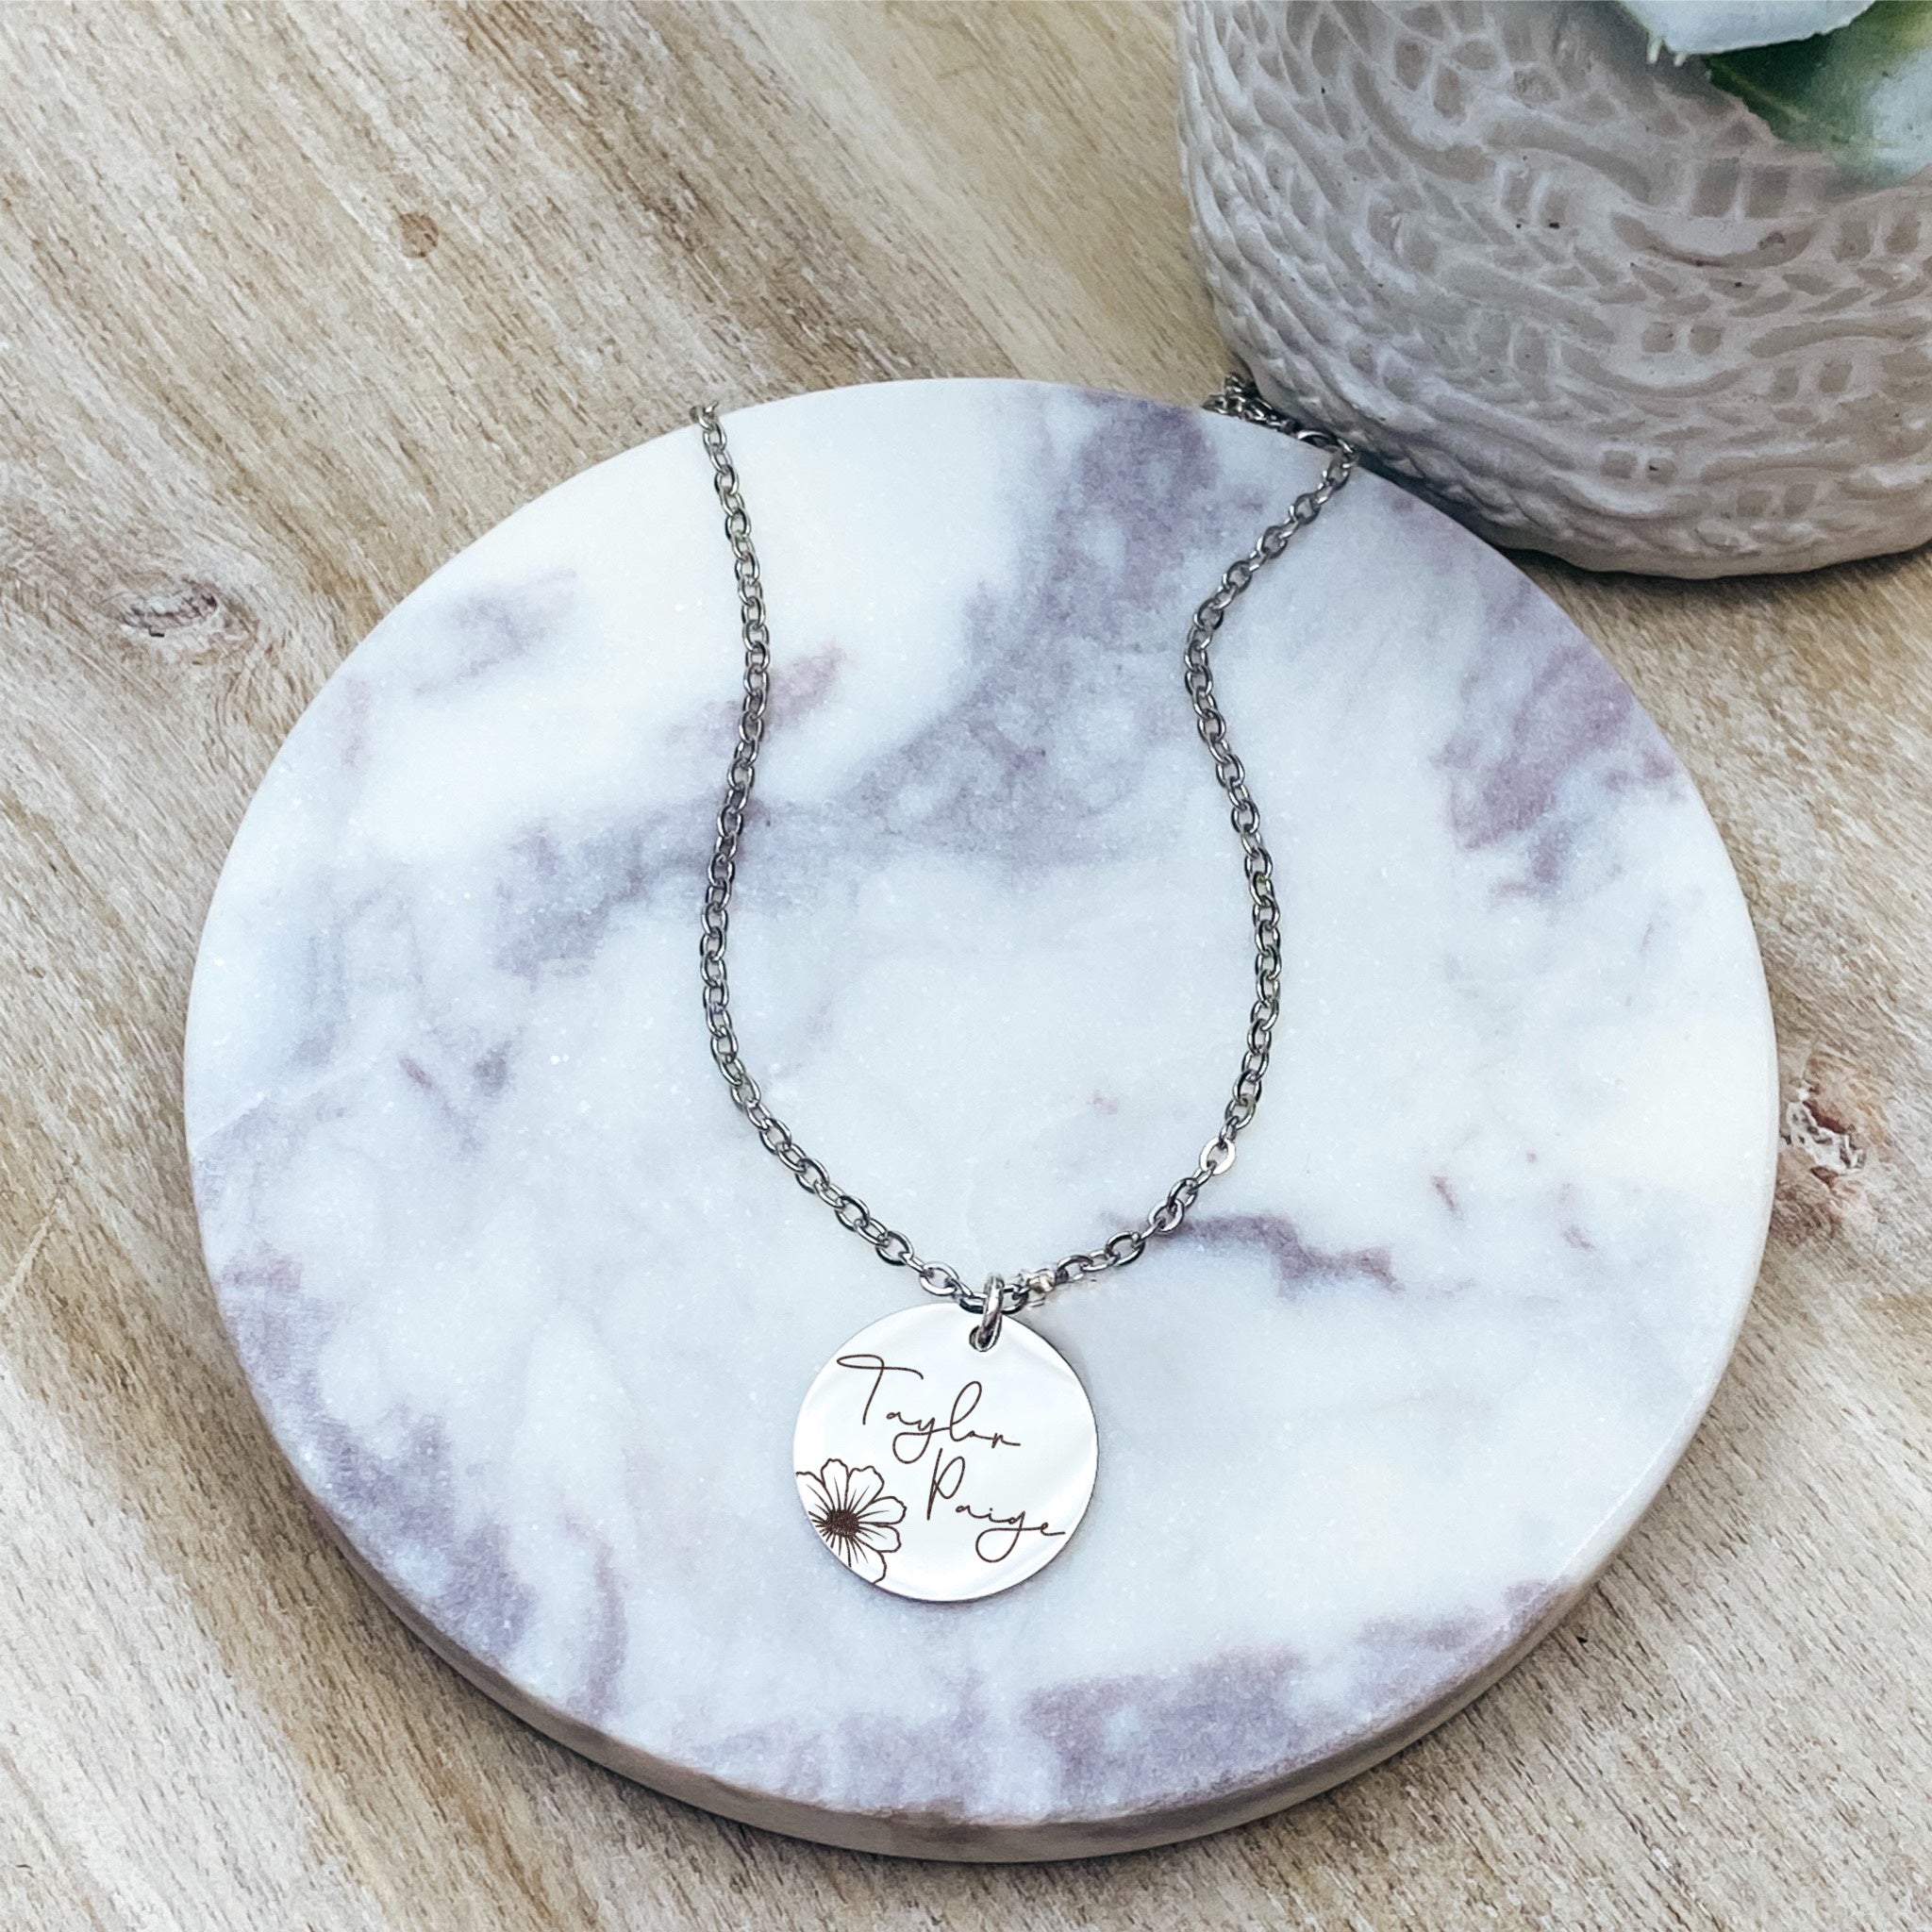 BIRTH FLOWER BUD + NAME NECKLACE